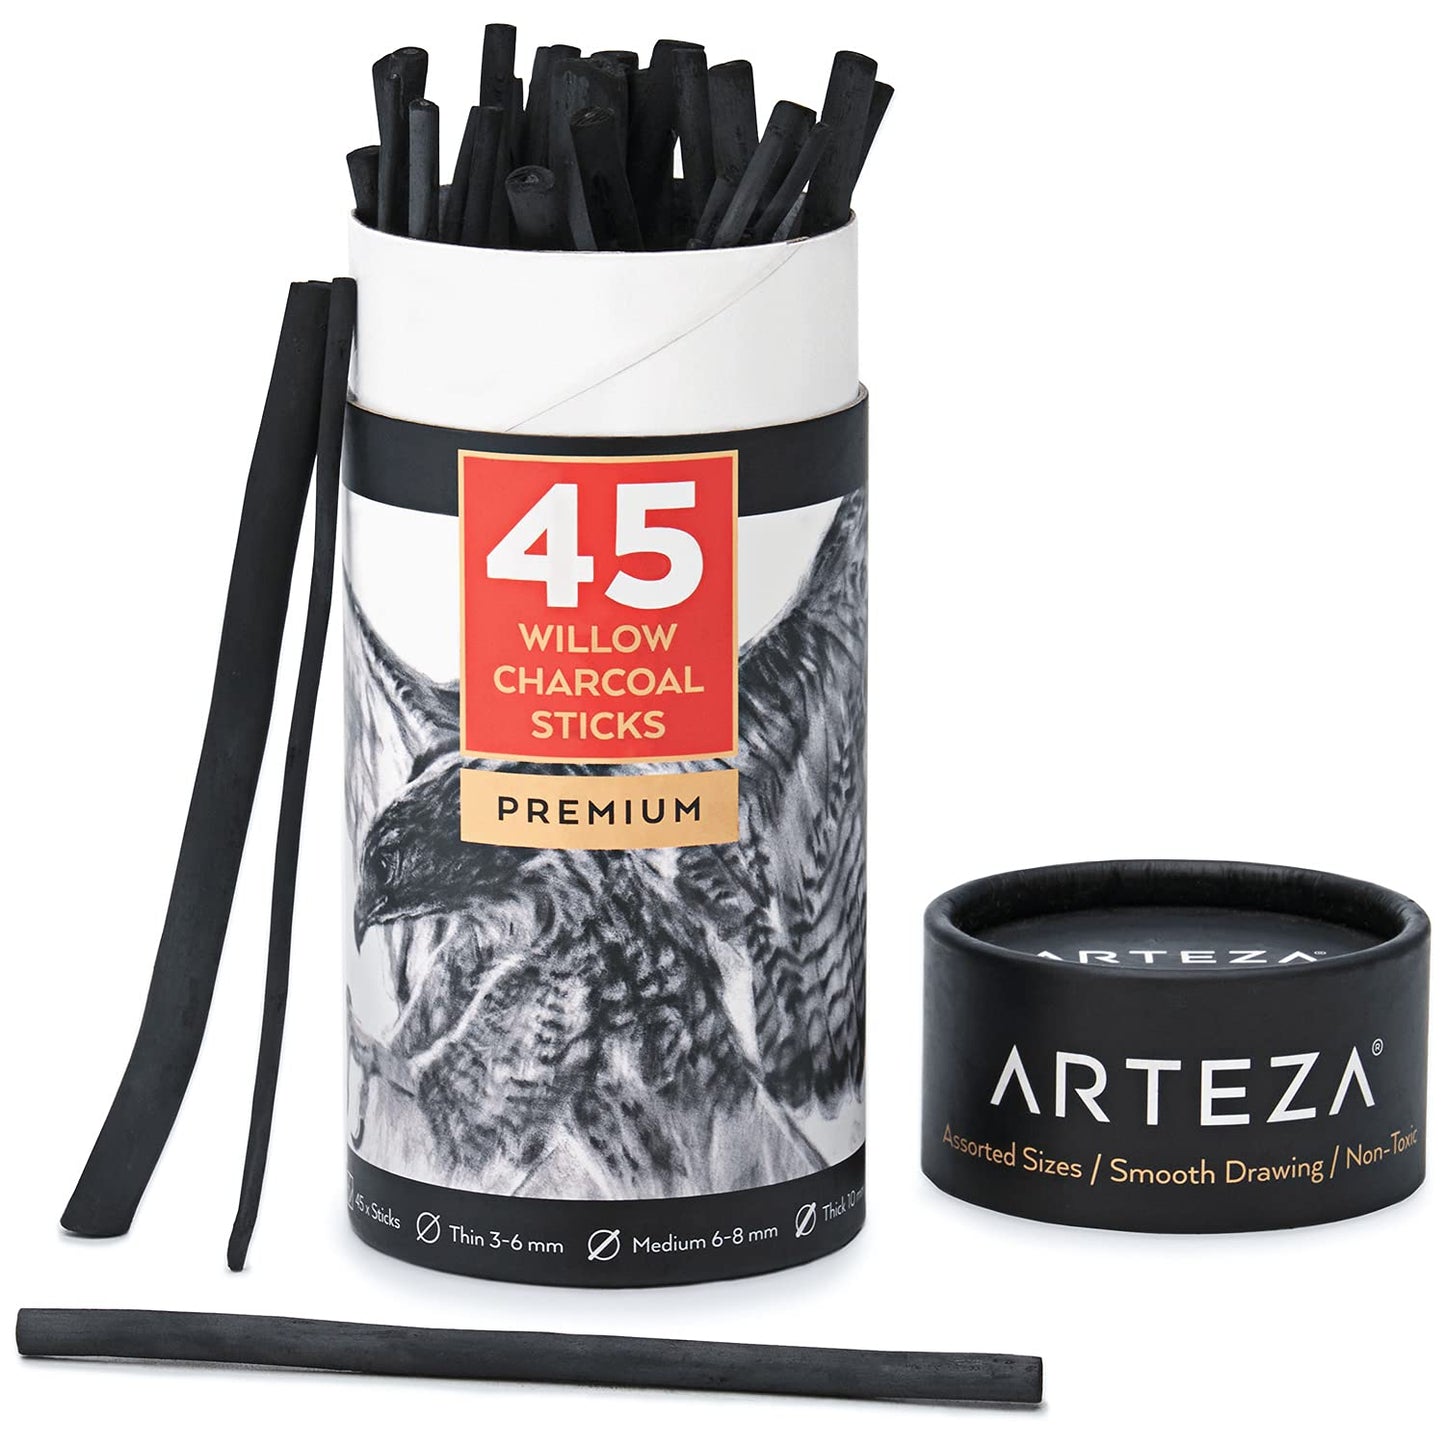 Arteza Willow Charcoal Sticks, Assorted Sizes - Set of 45